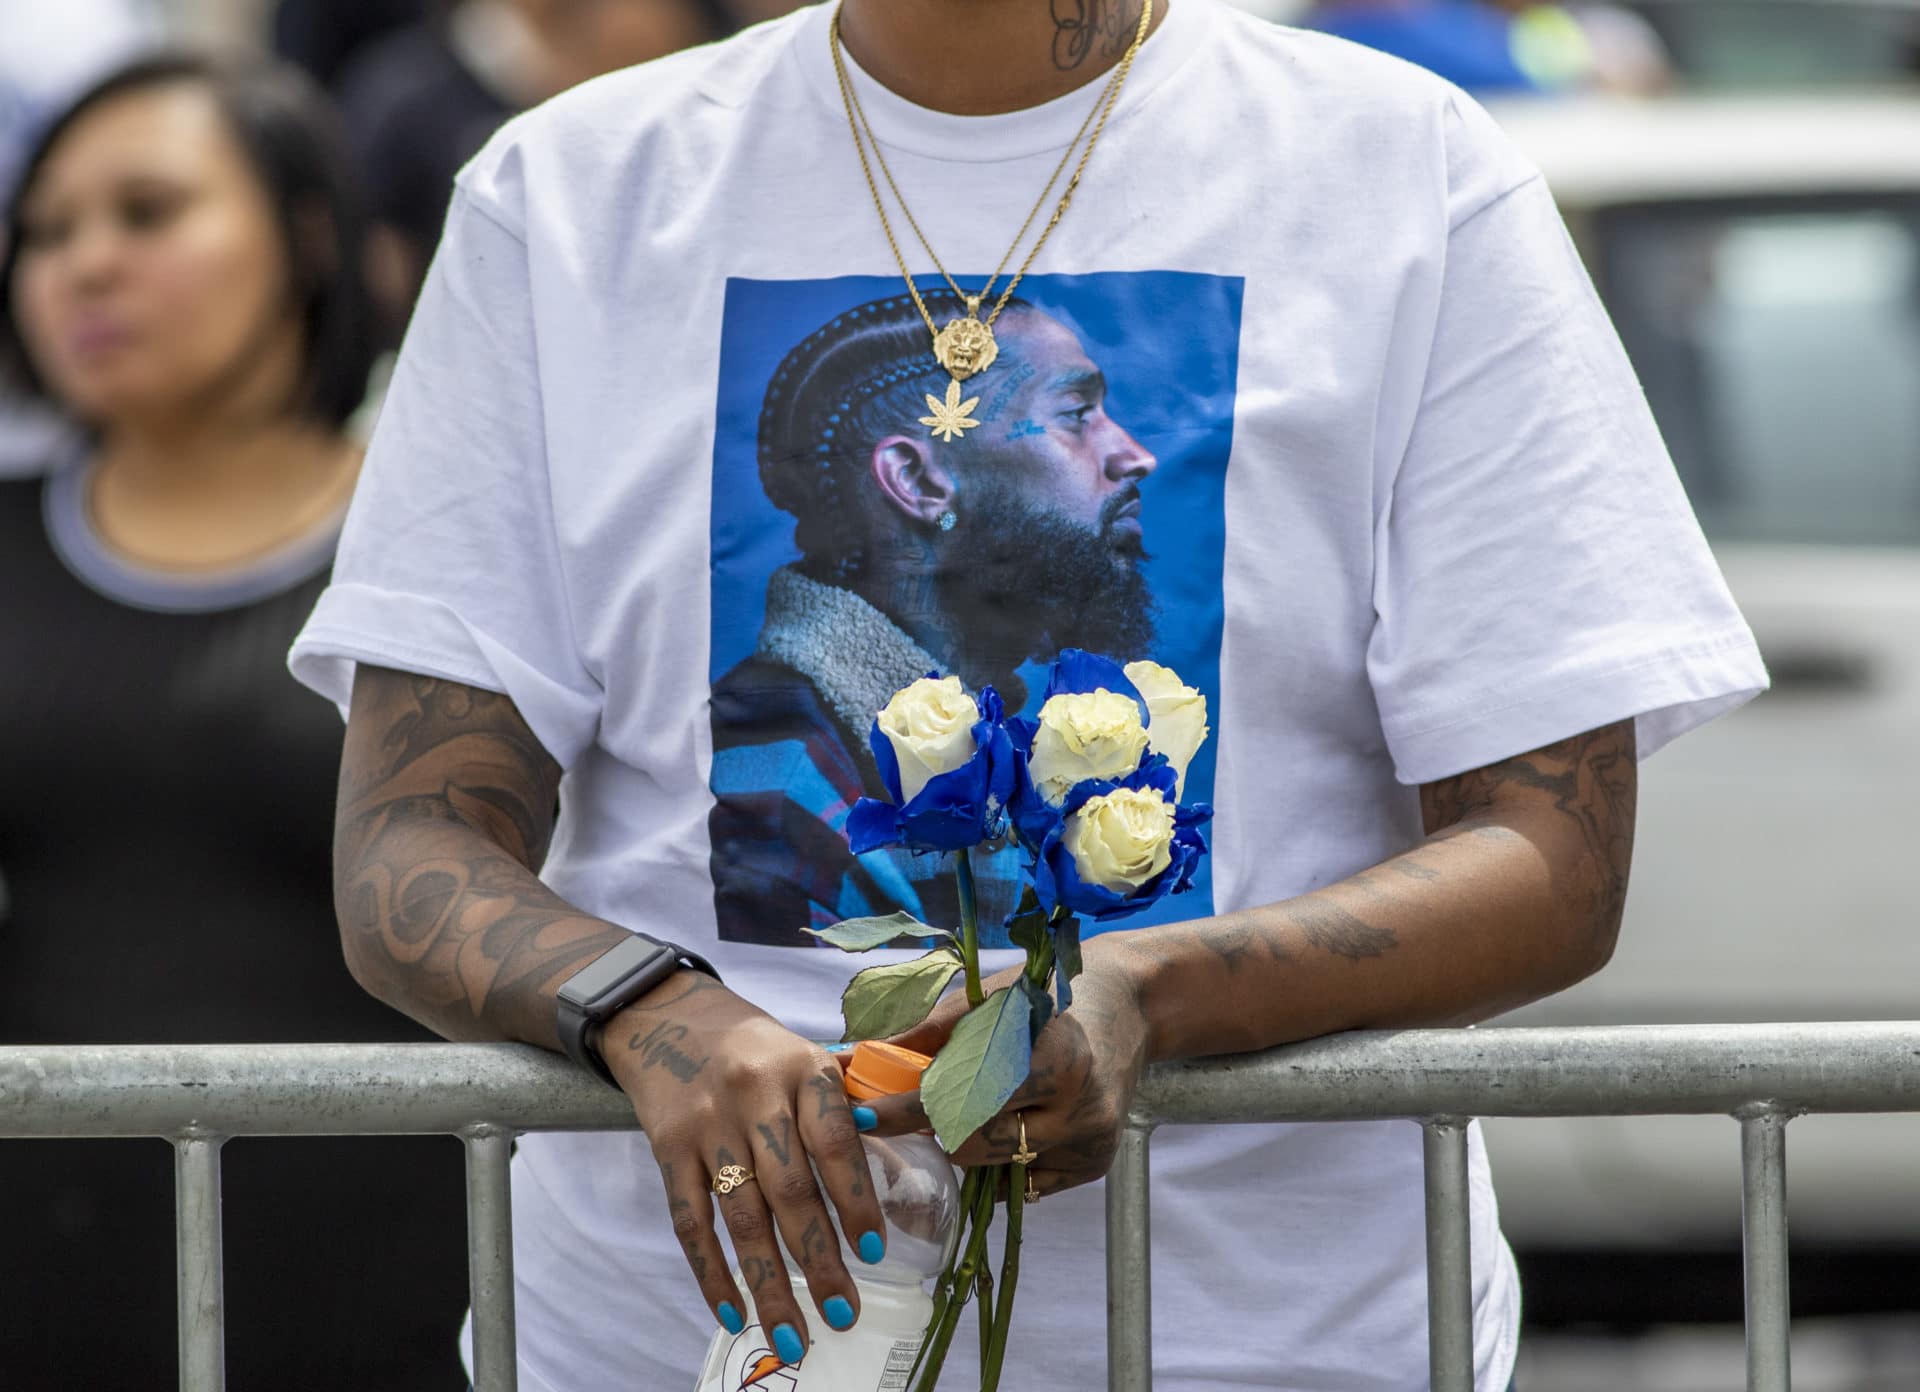 1 Dead, Others Injured After Drive-By Shooting Strikes Nipsey Hussle's Memorial Procession